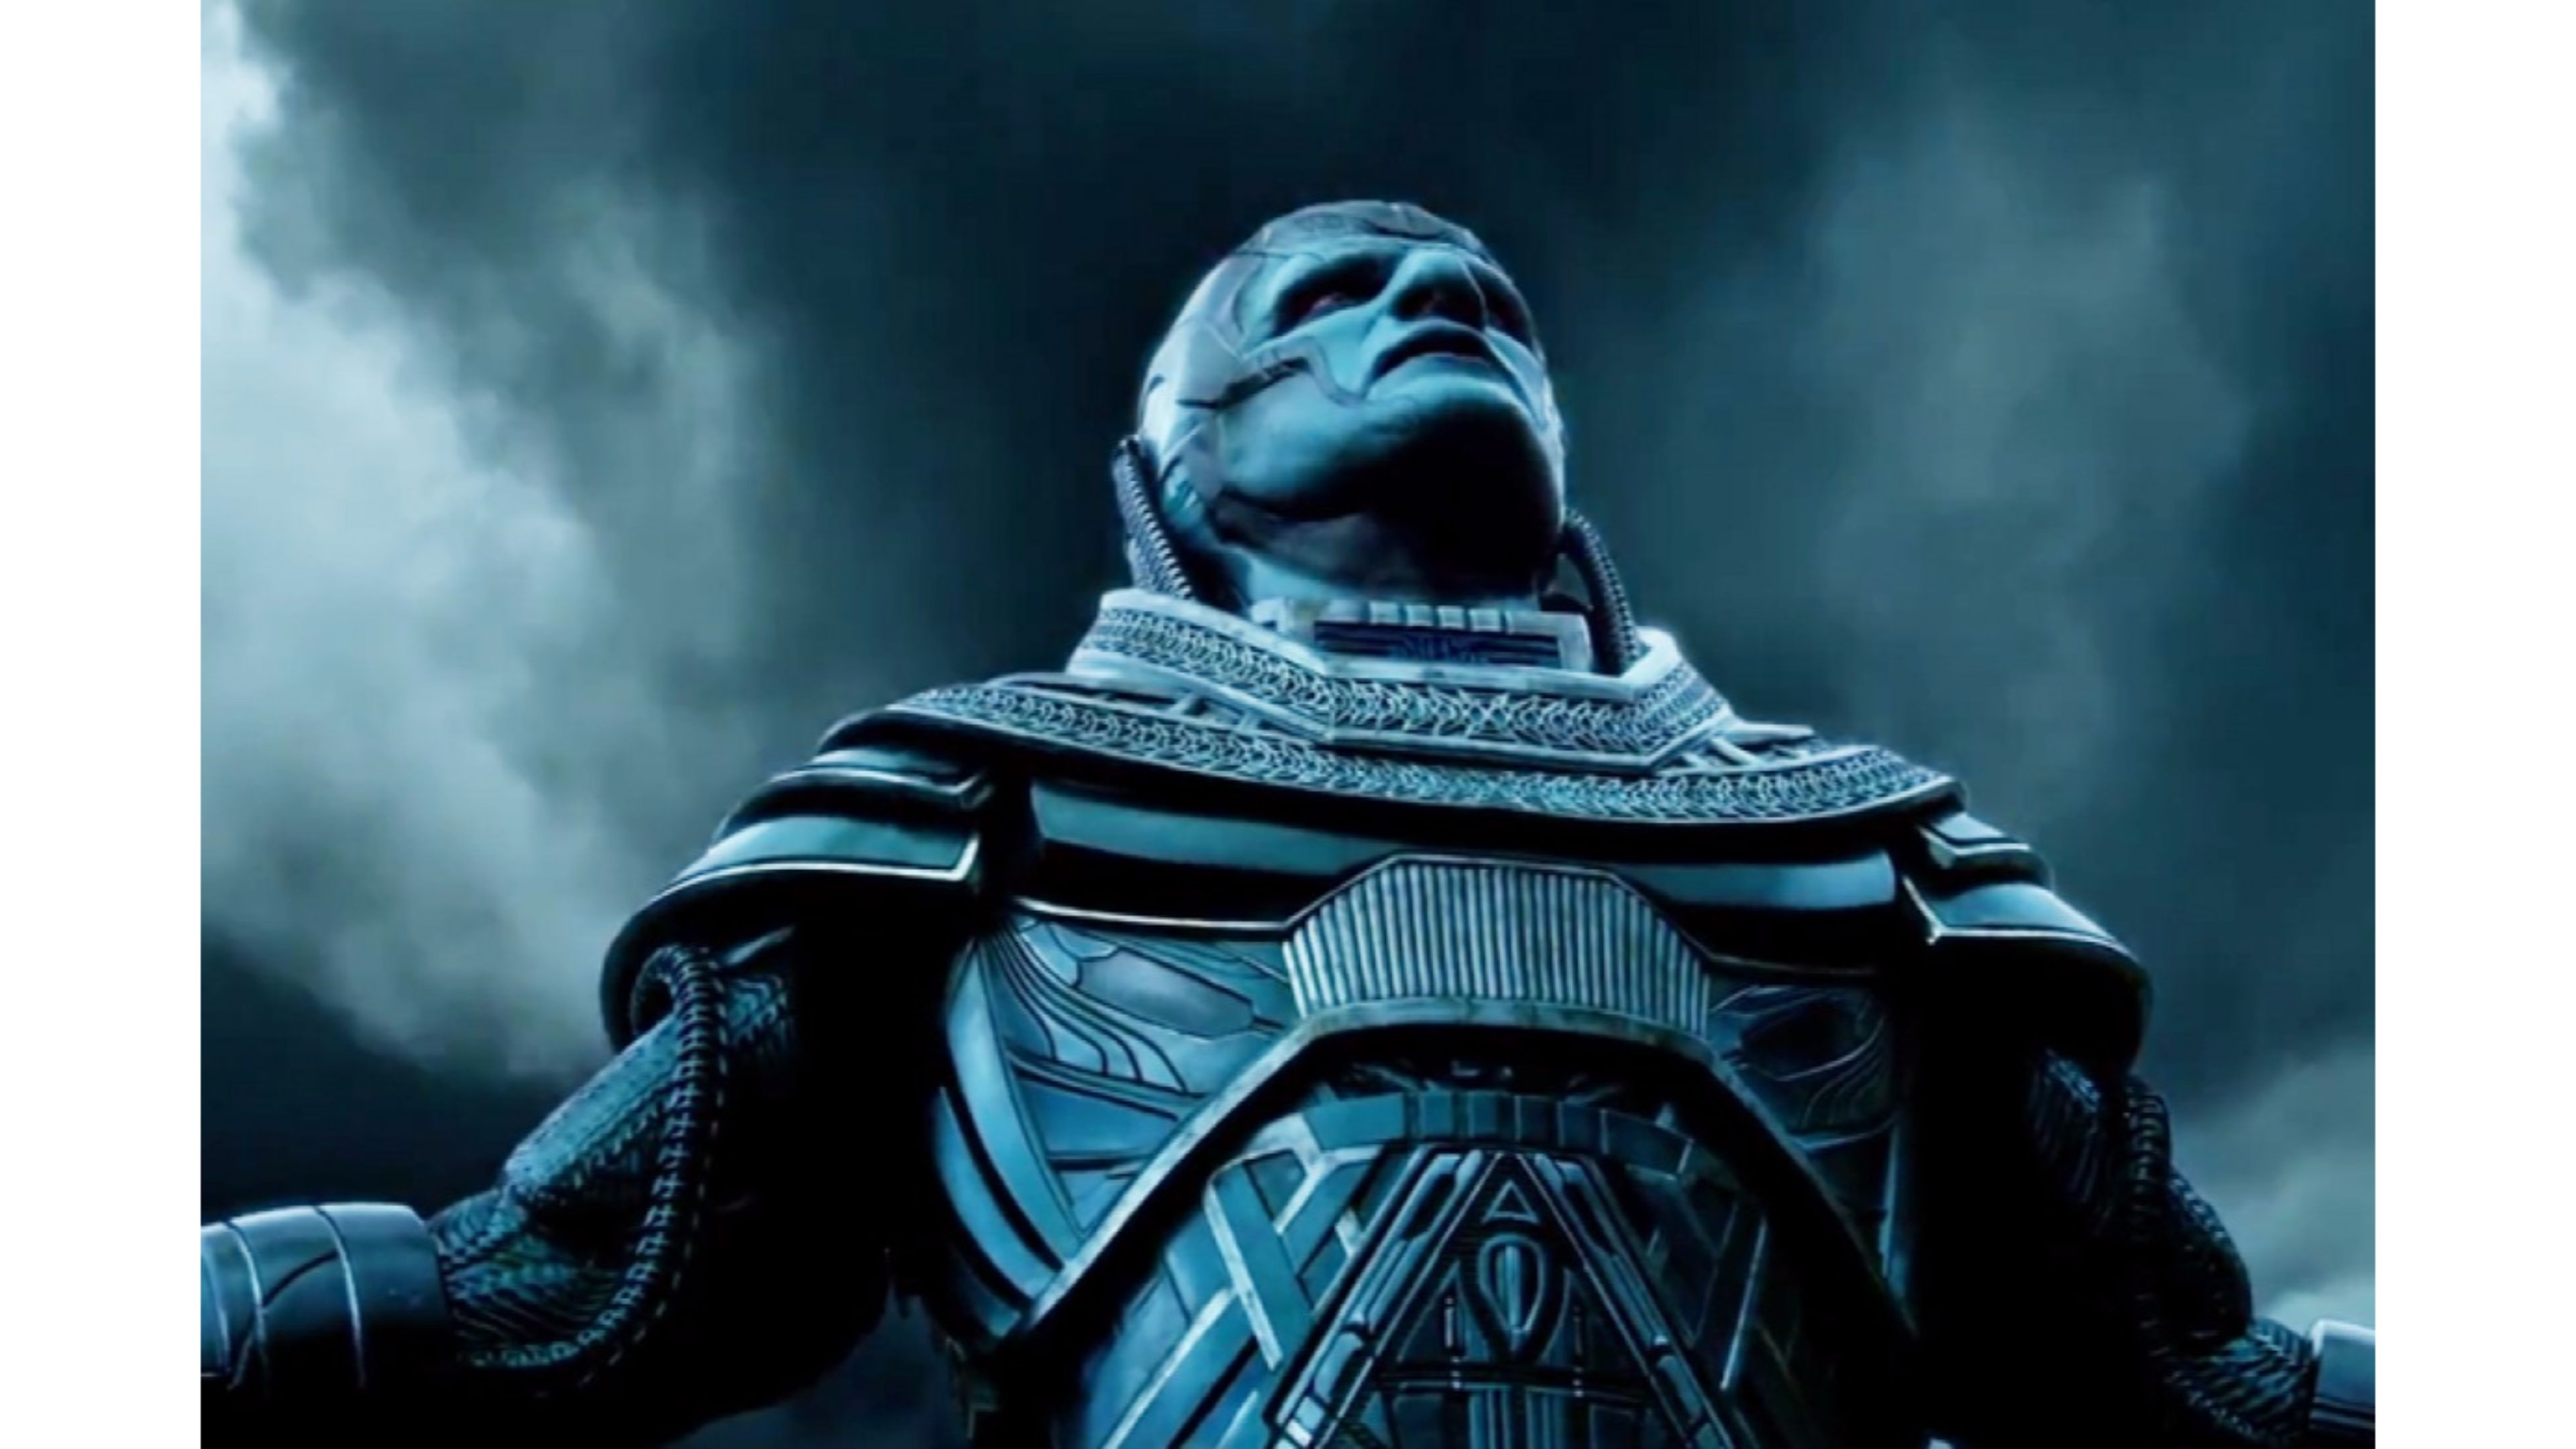 Free Download Other Collections Of X Men Apocalypse Wallpaper 3840x2160 For Your Desktop Mobile Tablet Explore 48 X Men Apocalypse Wallpaper X Men Wallpaper X Men Wallpapers Storm X Men Wallpaper